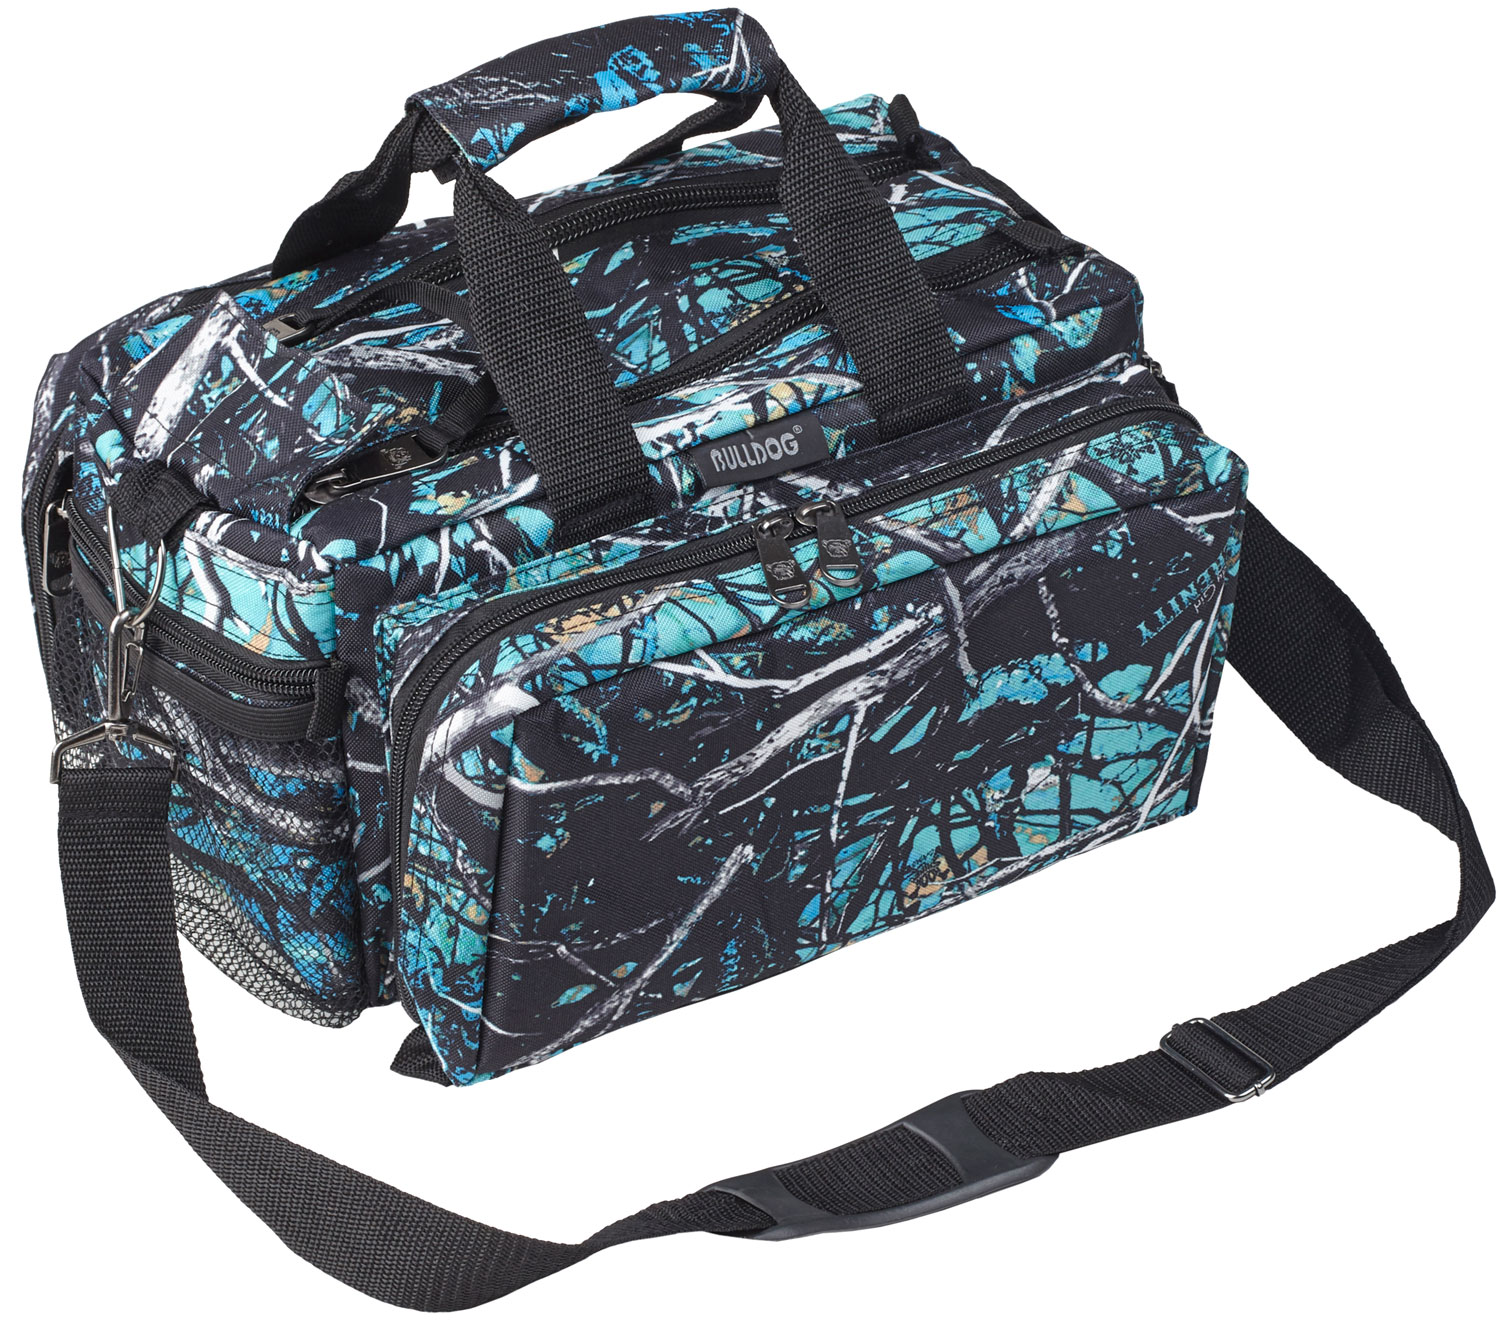 Bulldog BD910SRN Deluxe Range Bag Water Resistant Serenity Camo Nylon with Adjustable Strap, Removeable Divider, Storage Pockets & Deluxe Padding 13